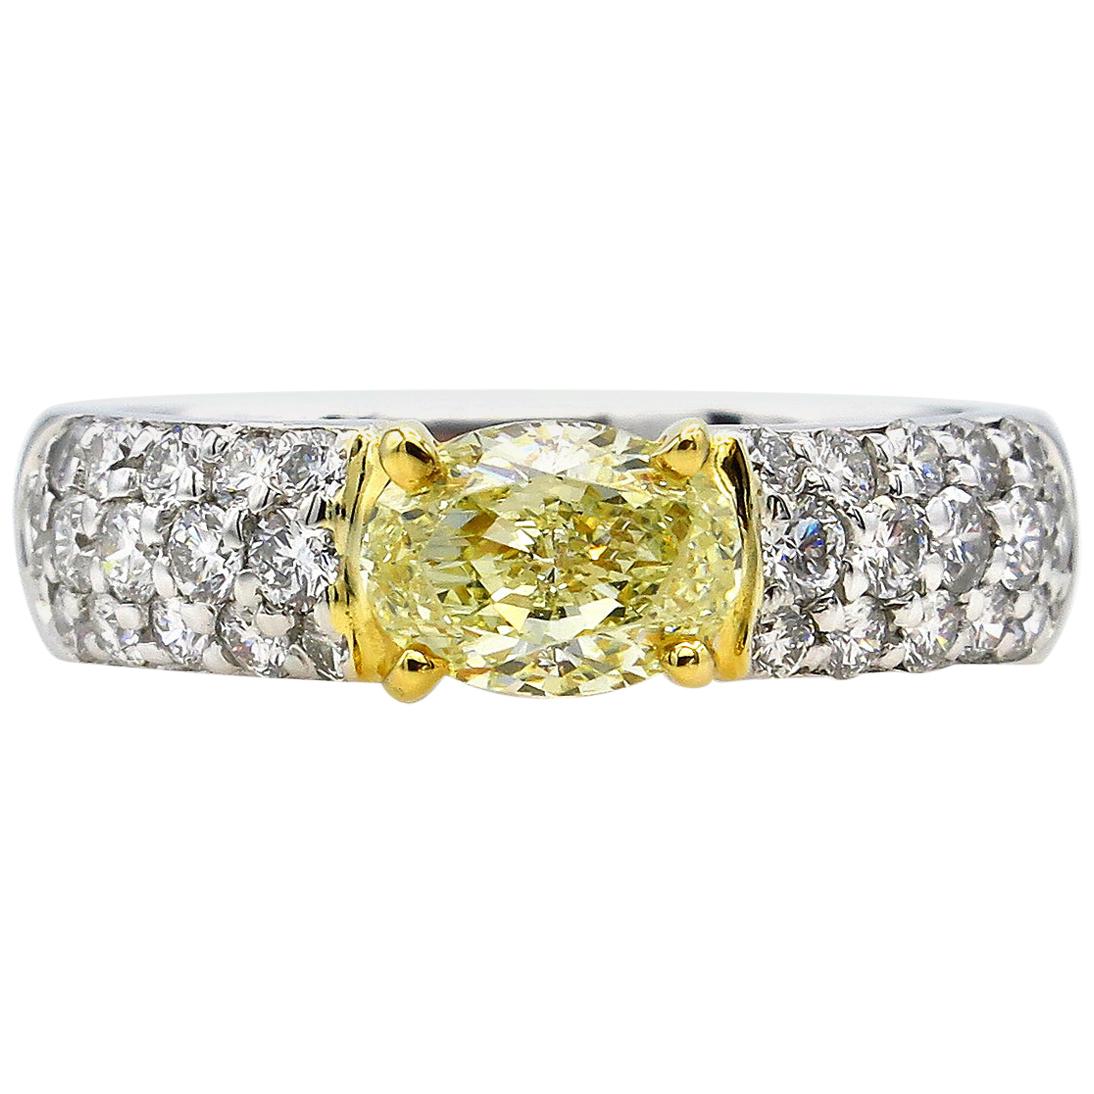 GIA 1.62 Carat Natural Fancy Yellow Oval Diamond Engagement Ring Pave Platinum